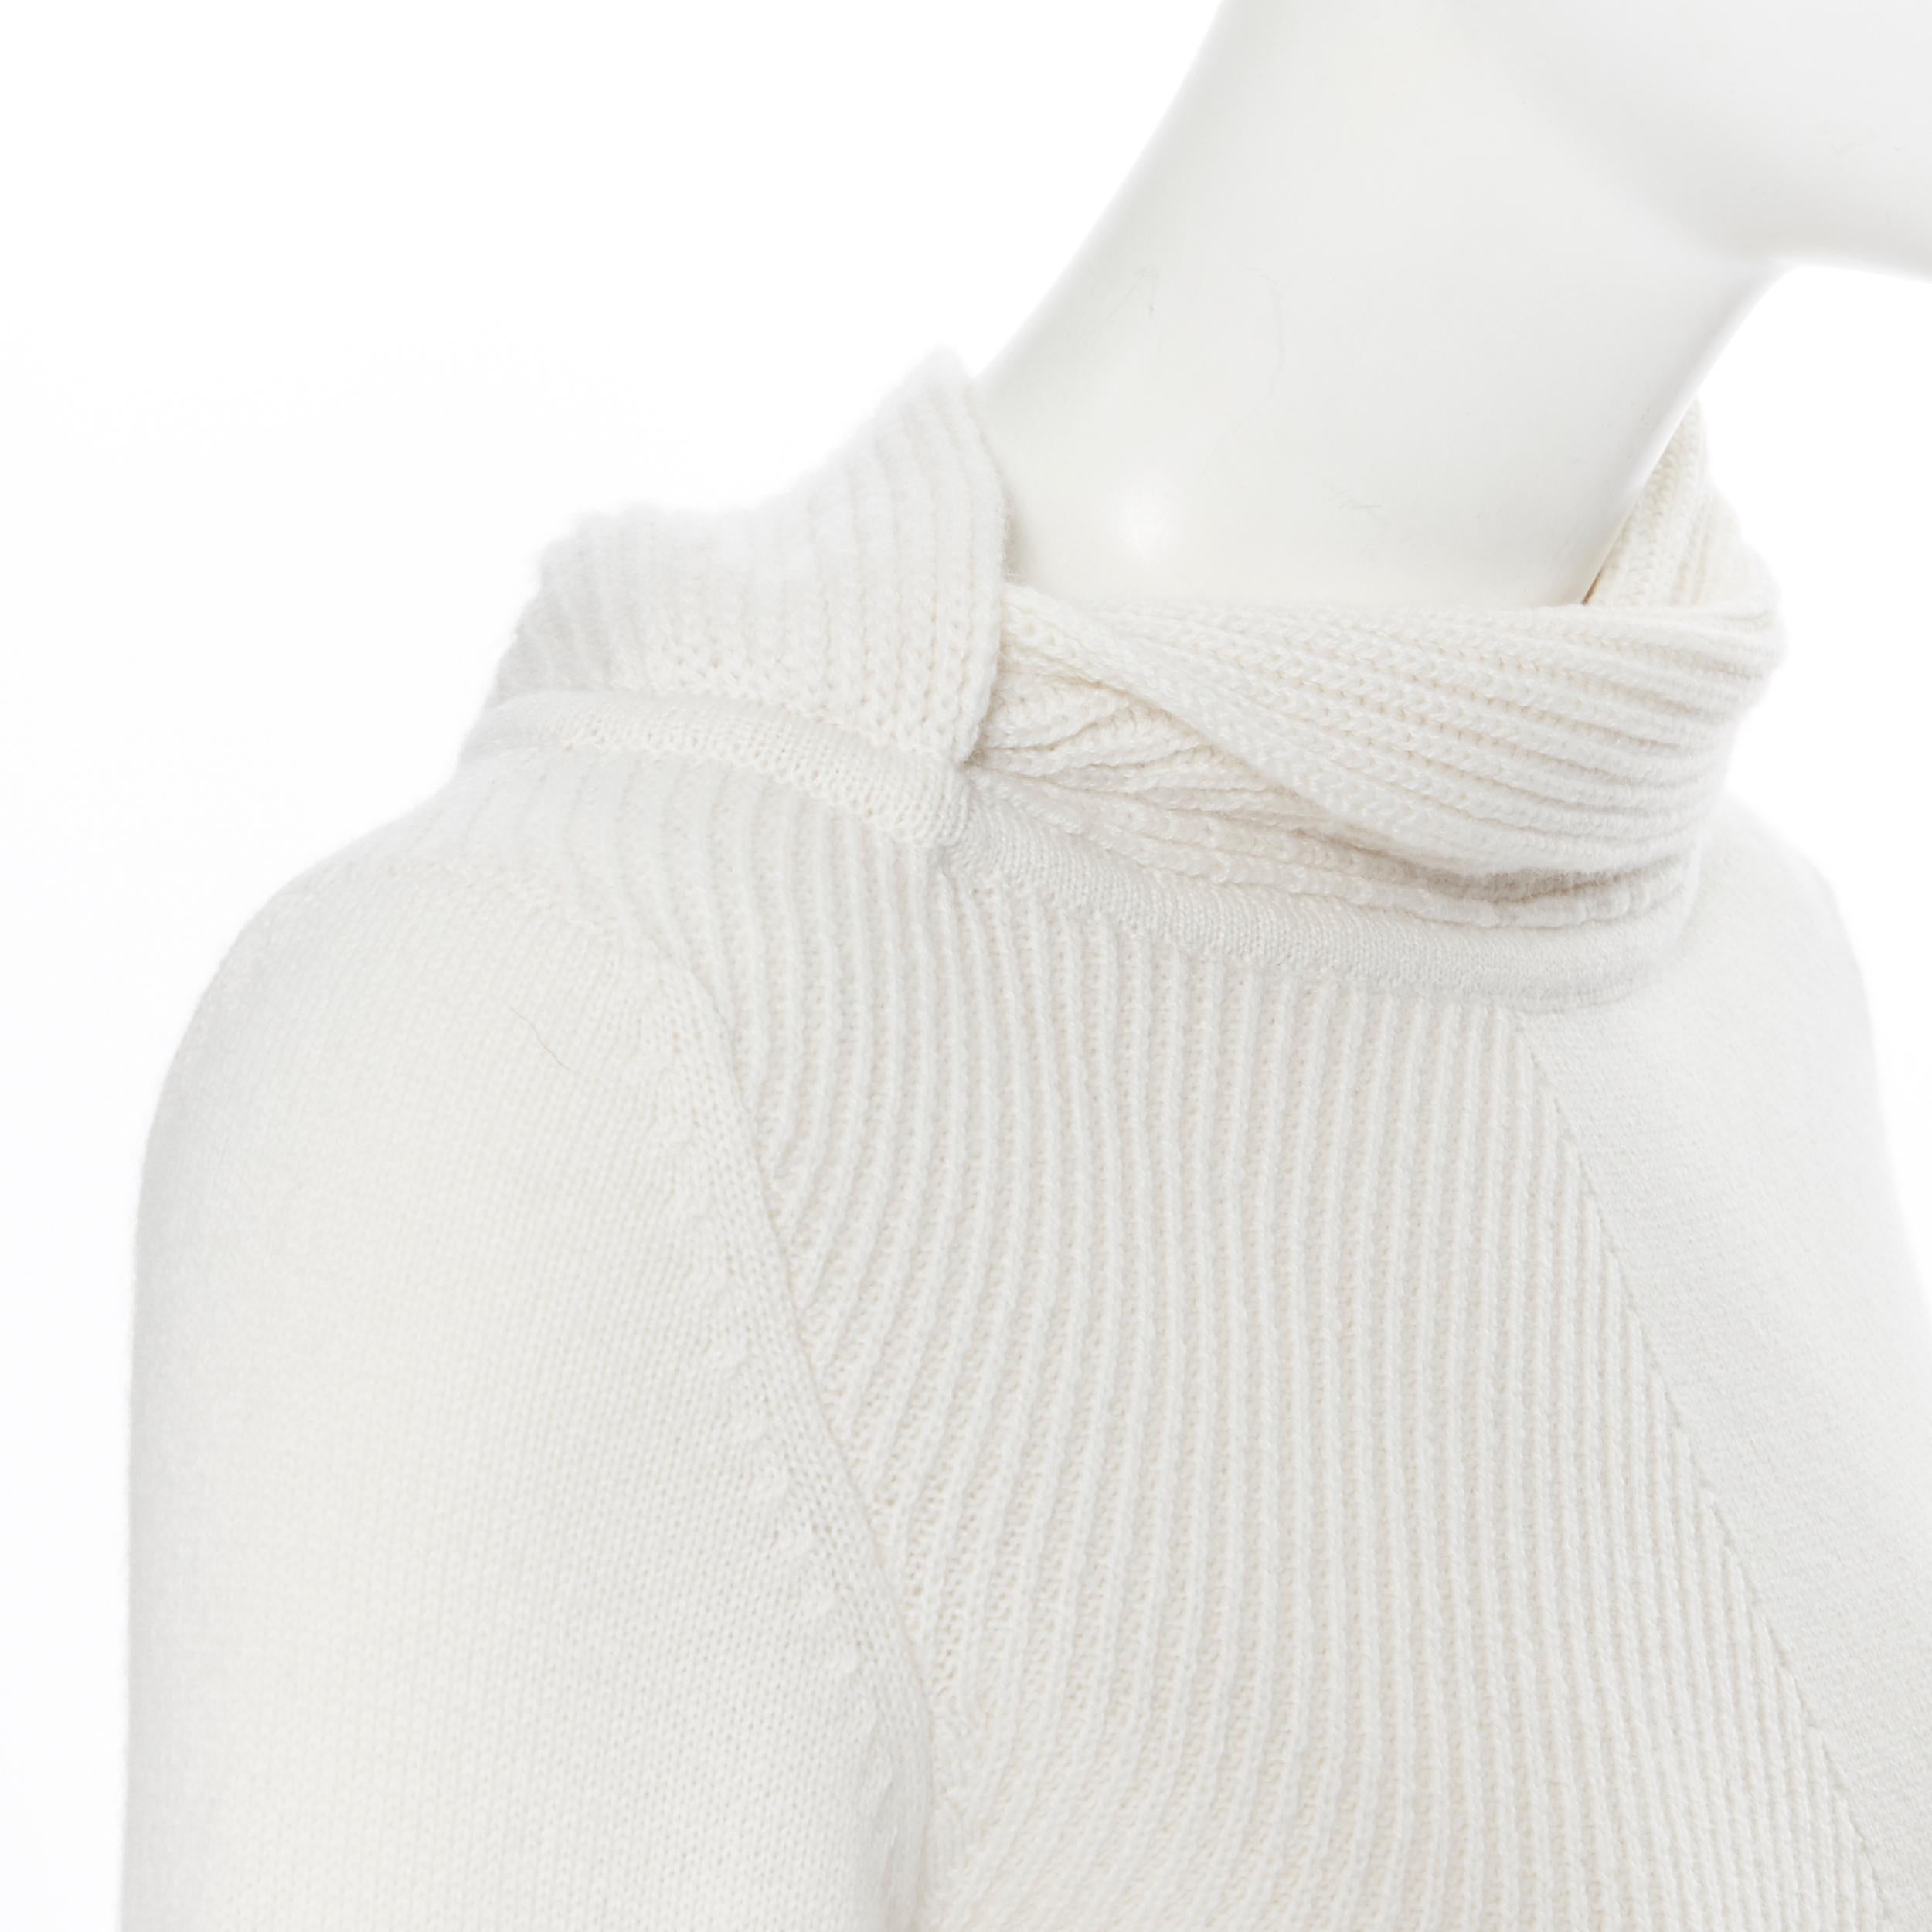 HERMES 100% cashmere ivory beige ribbed knit silver H charm sweater FR34 XS
Brand: Hermes
Model Name / Style: Sweater
Material: Cashmere
Color: Beige
Pattern: Solid
Extra Detail: Asymmetric wrap high collar. Textured ribbing panel at front right